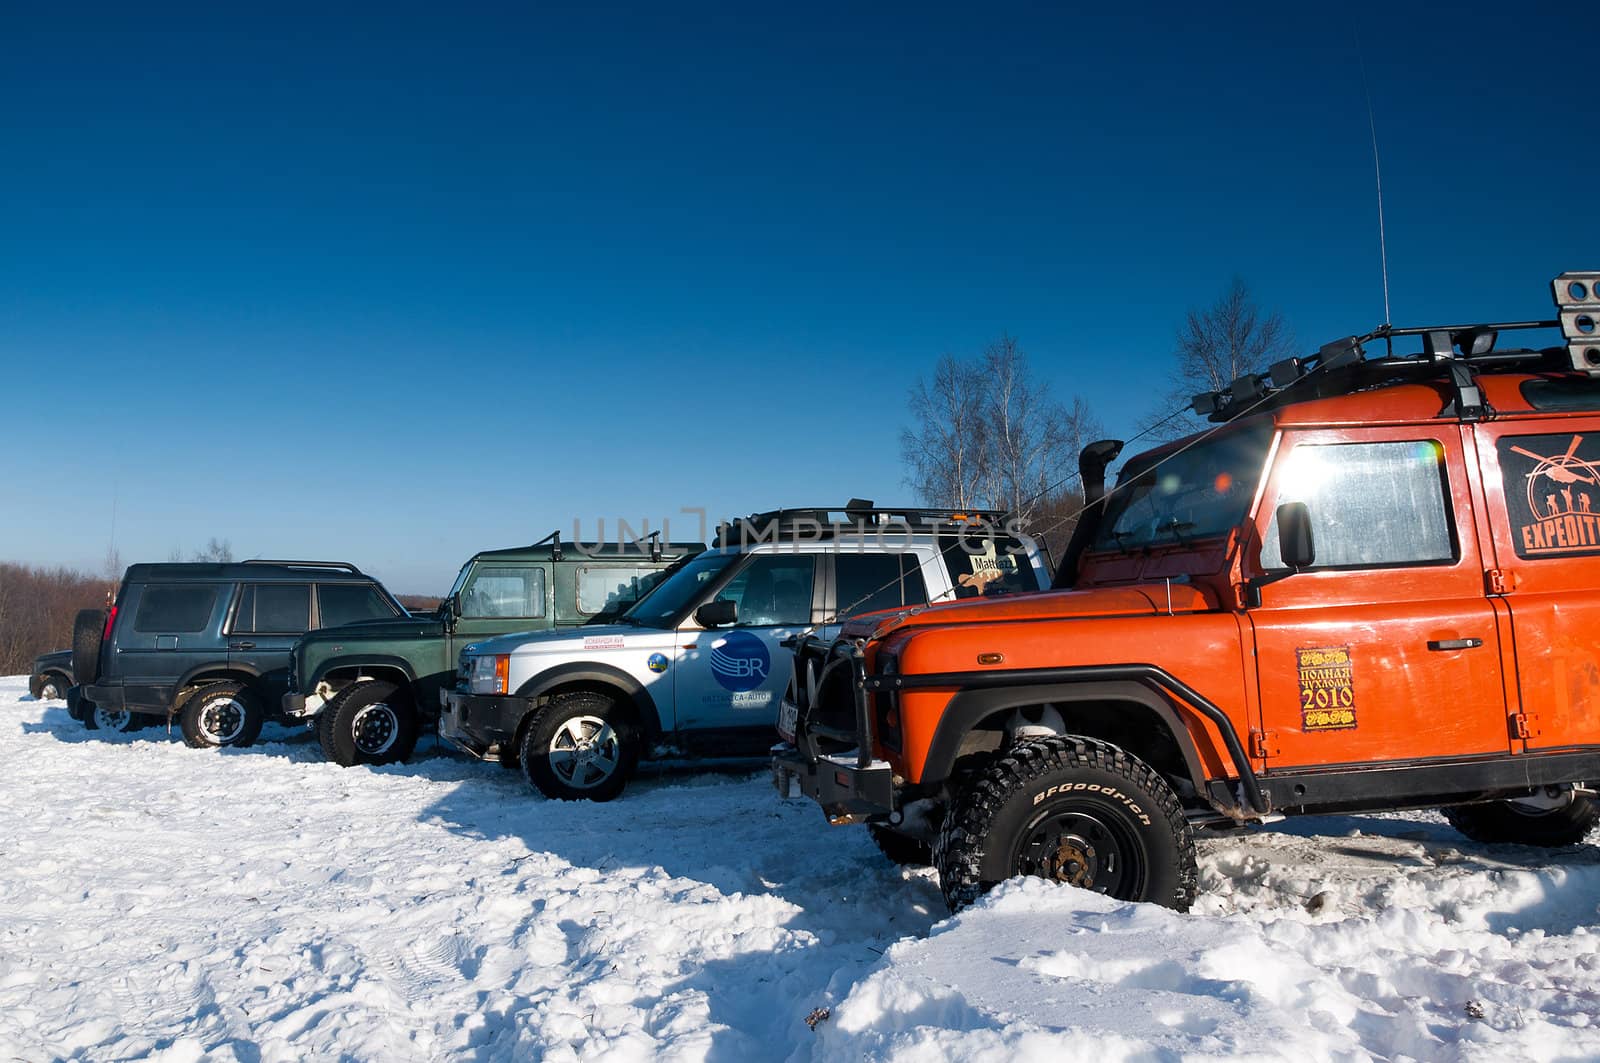 SUVs: two Land Rover Defender and Discovery
Car on background the Russian winter.
February 19, 2011